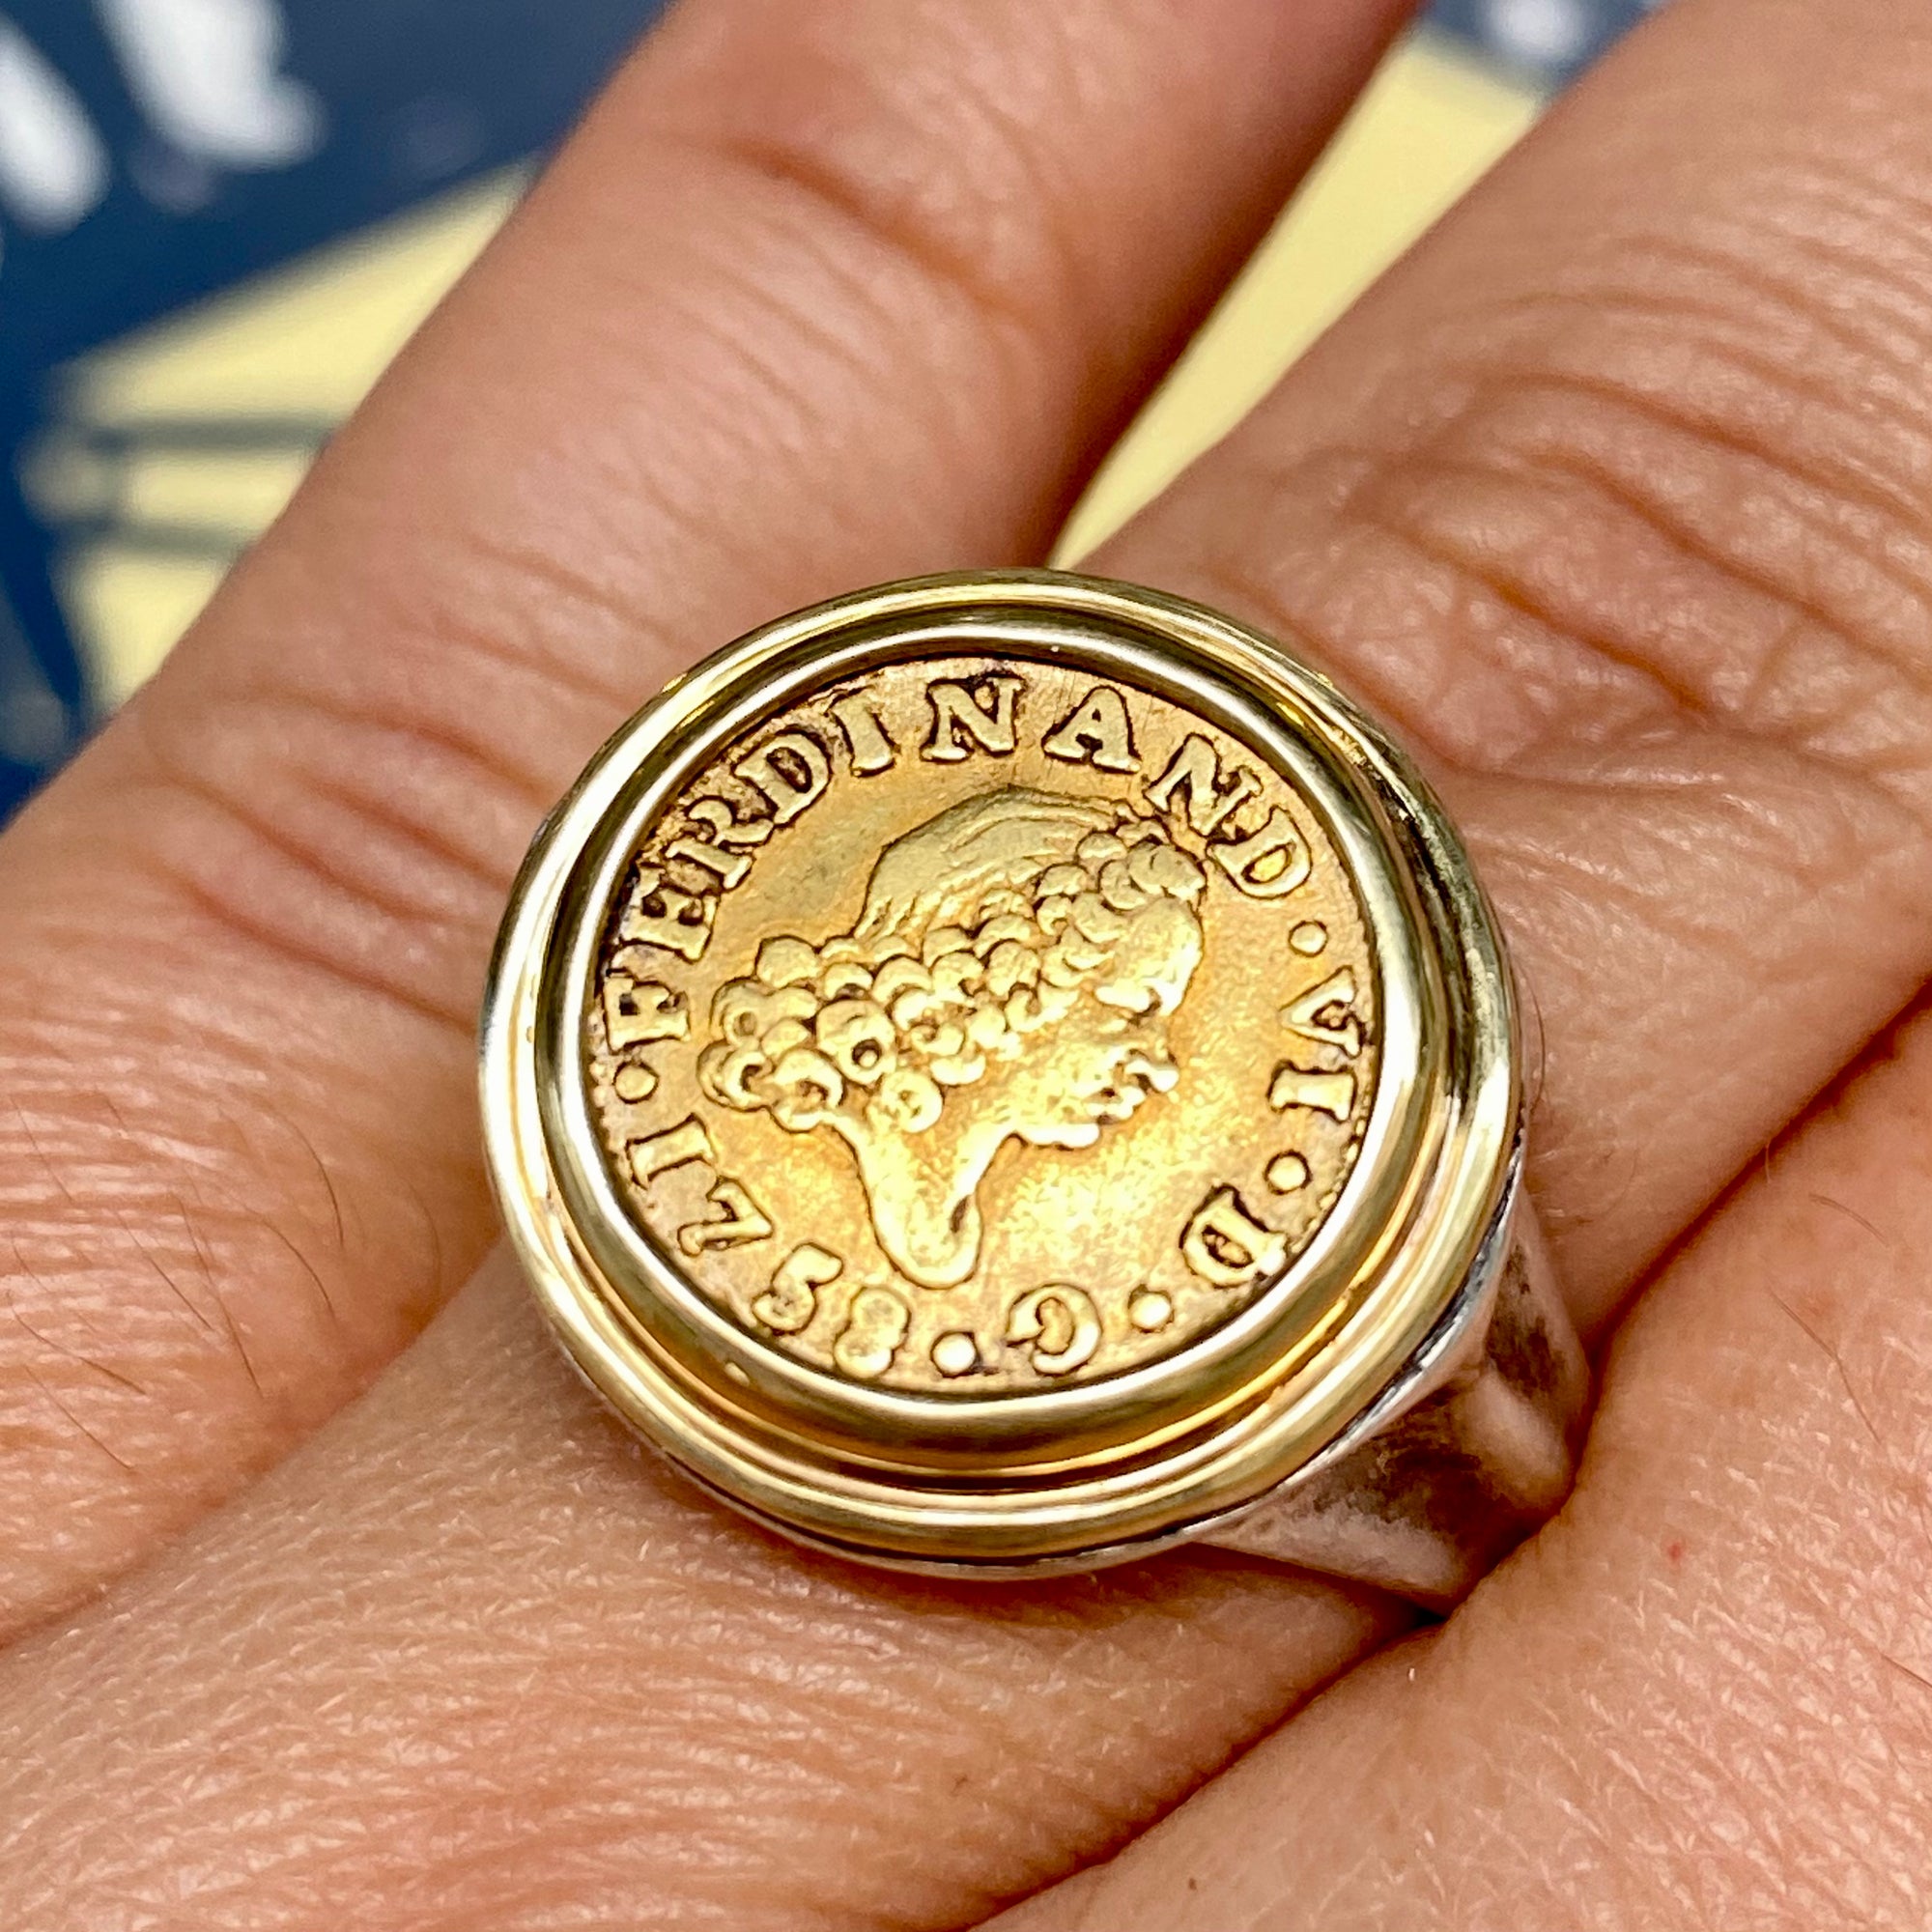 Gold 1/2 Escudo - Mint: Madrid, Spain - Grade NGC AU 53 - Custom mounted in a Sterling ring with an 18K gold bezel.